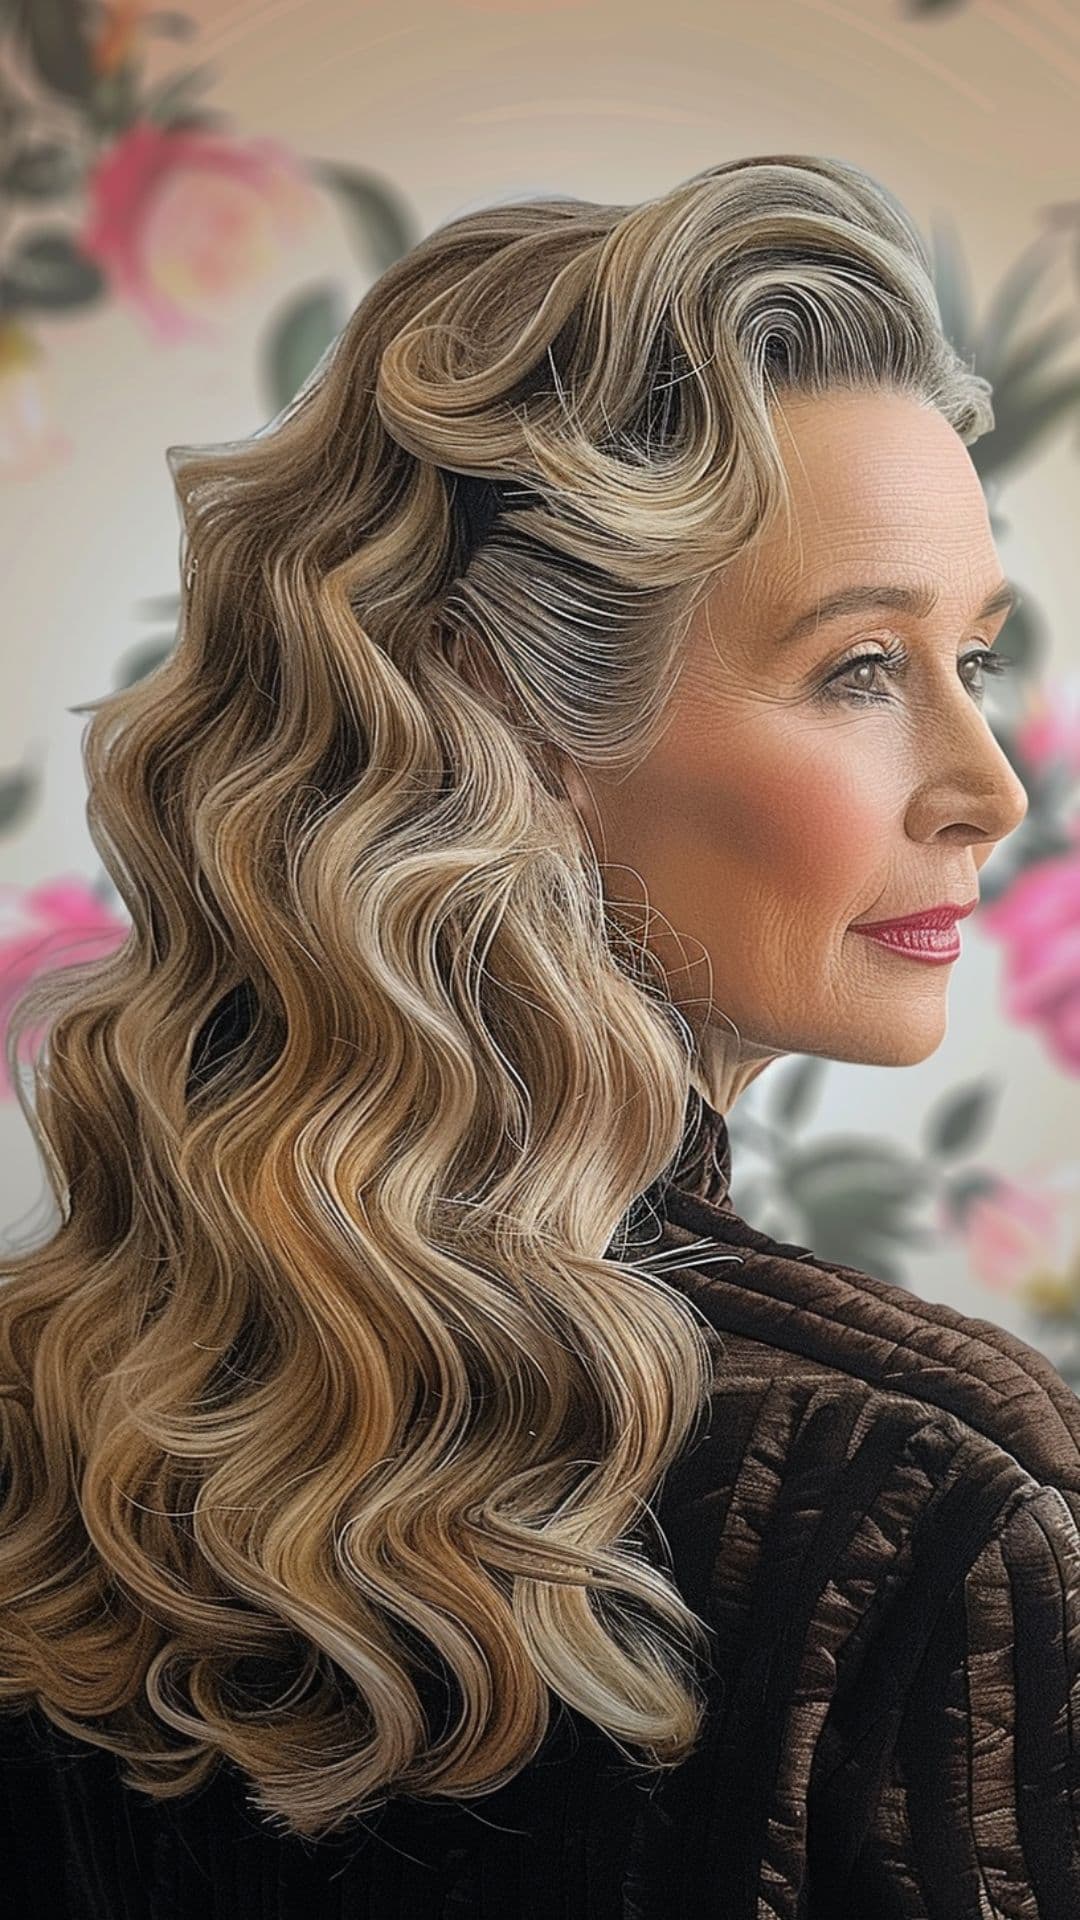 An old woman modelling a hollywood waves hairstyle.